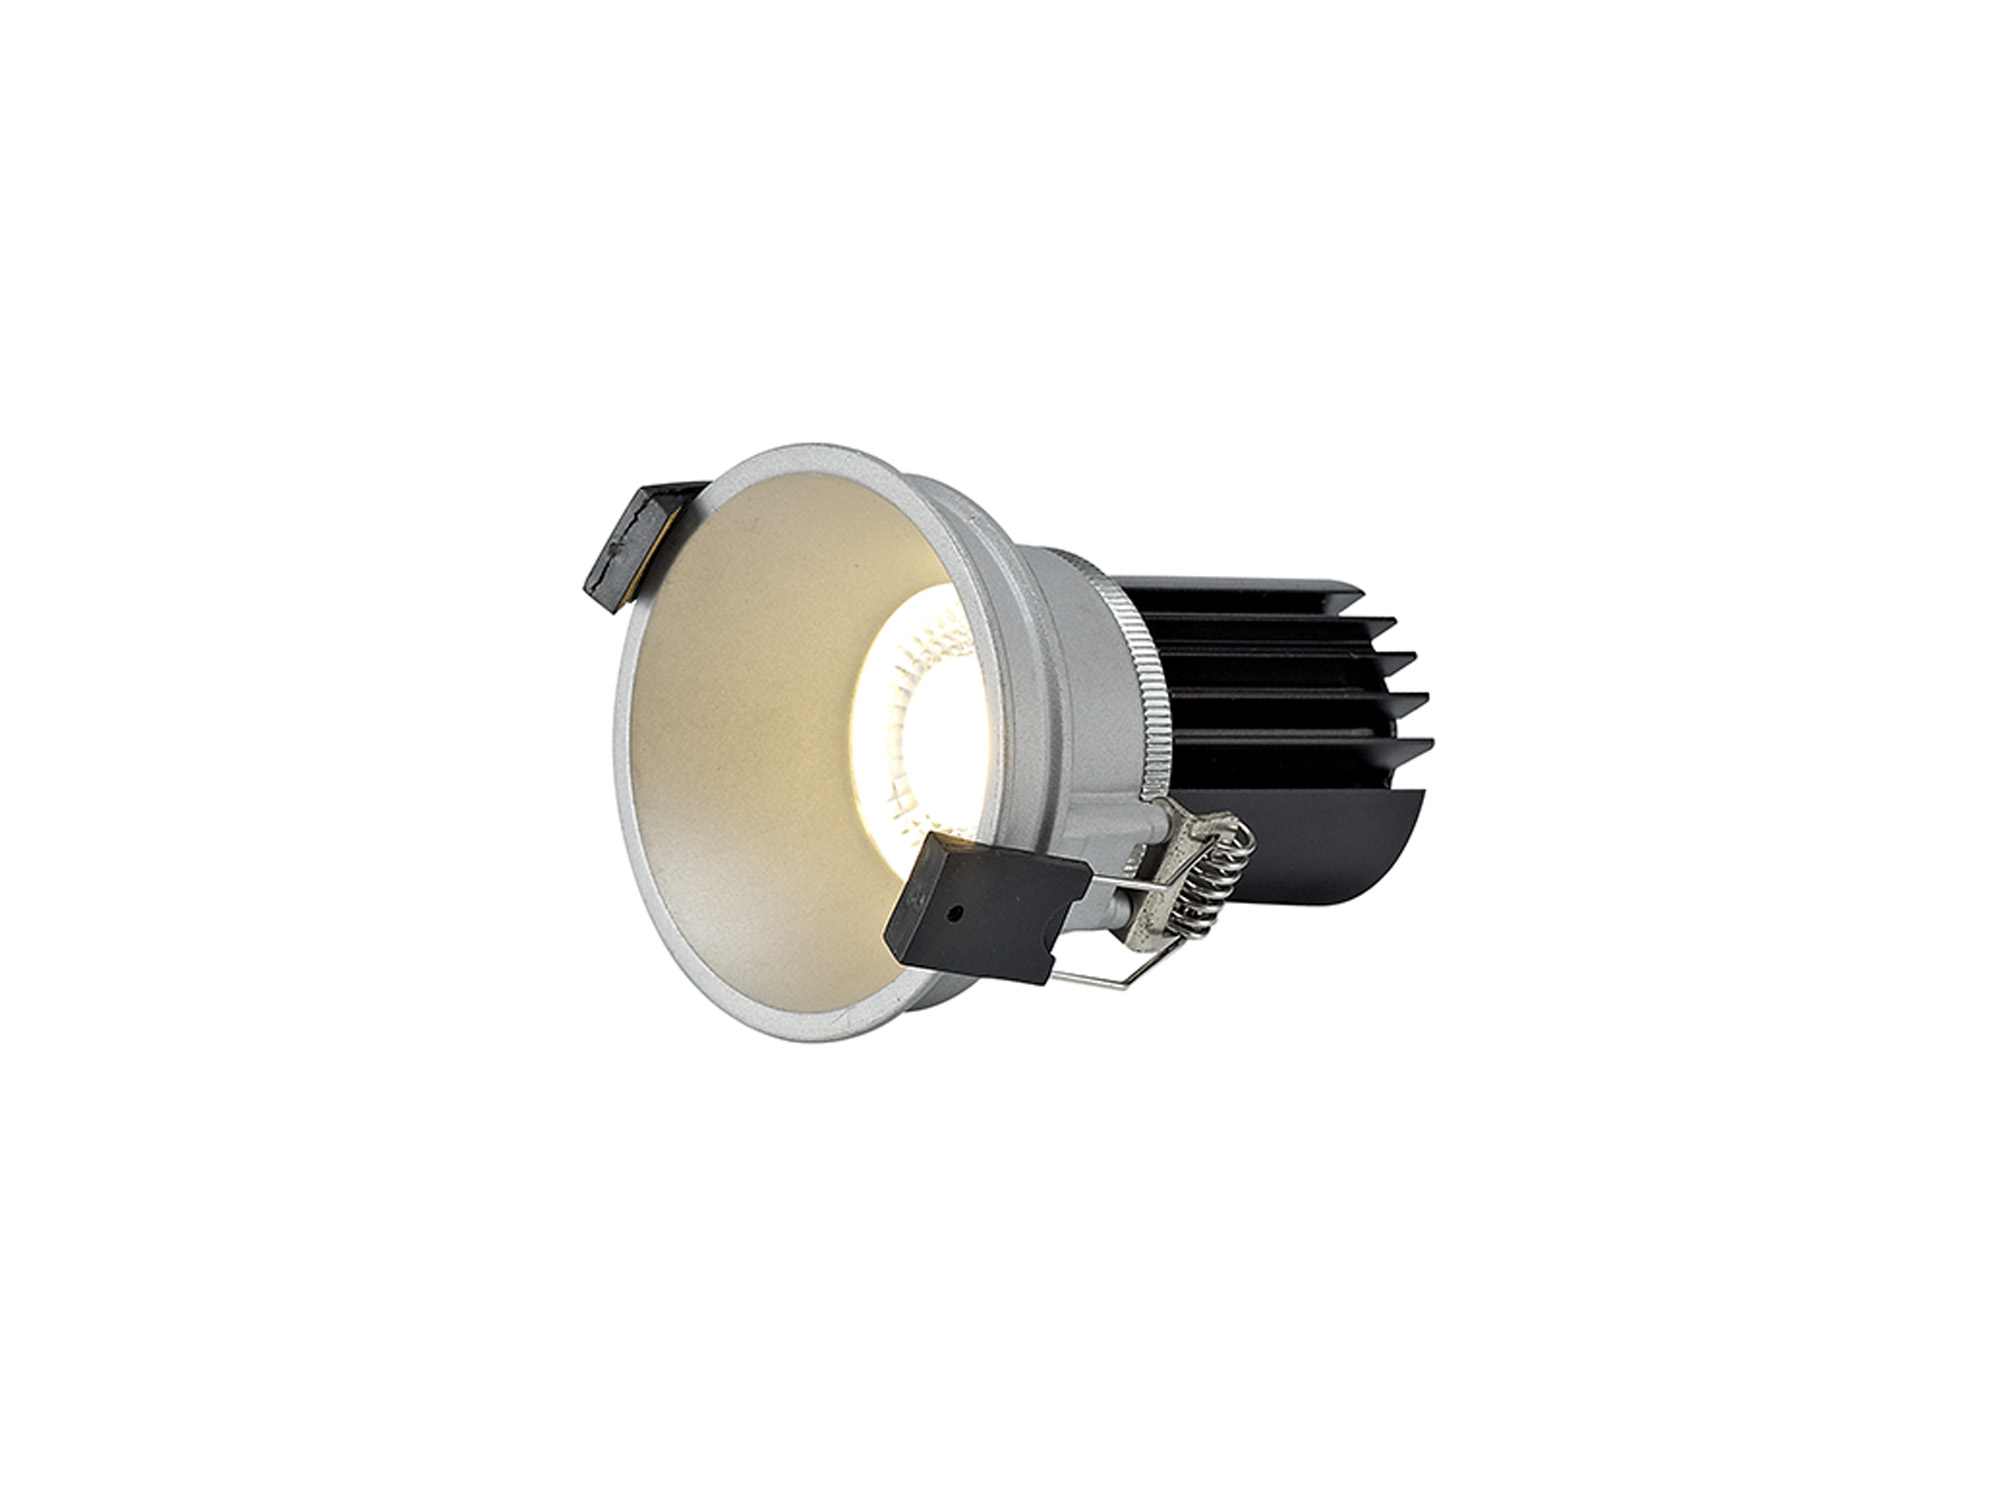 DM201693  Bania 12 Powered by Tridonic  12W 2700K 1200lm 12° CRI>90 LED Engine; 350mA Silver Fixed Recessed Spotlight; IP20